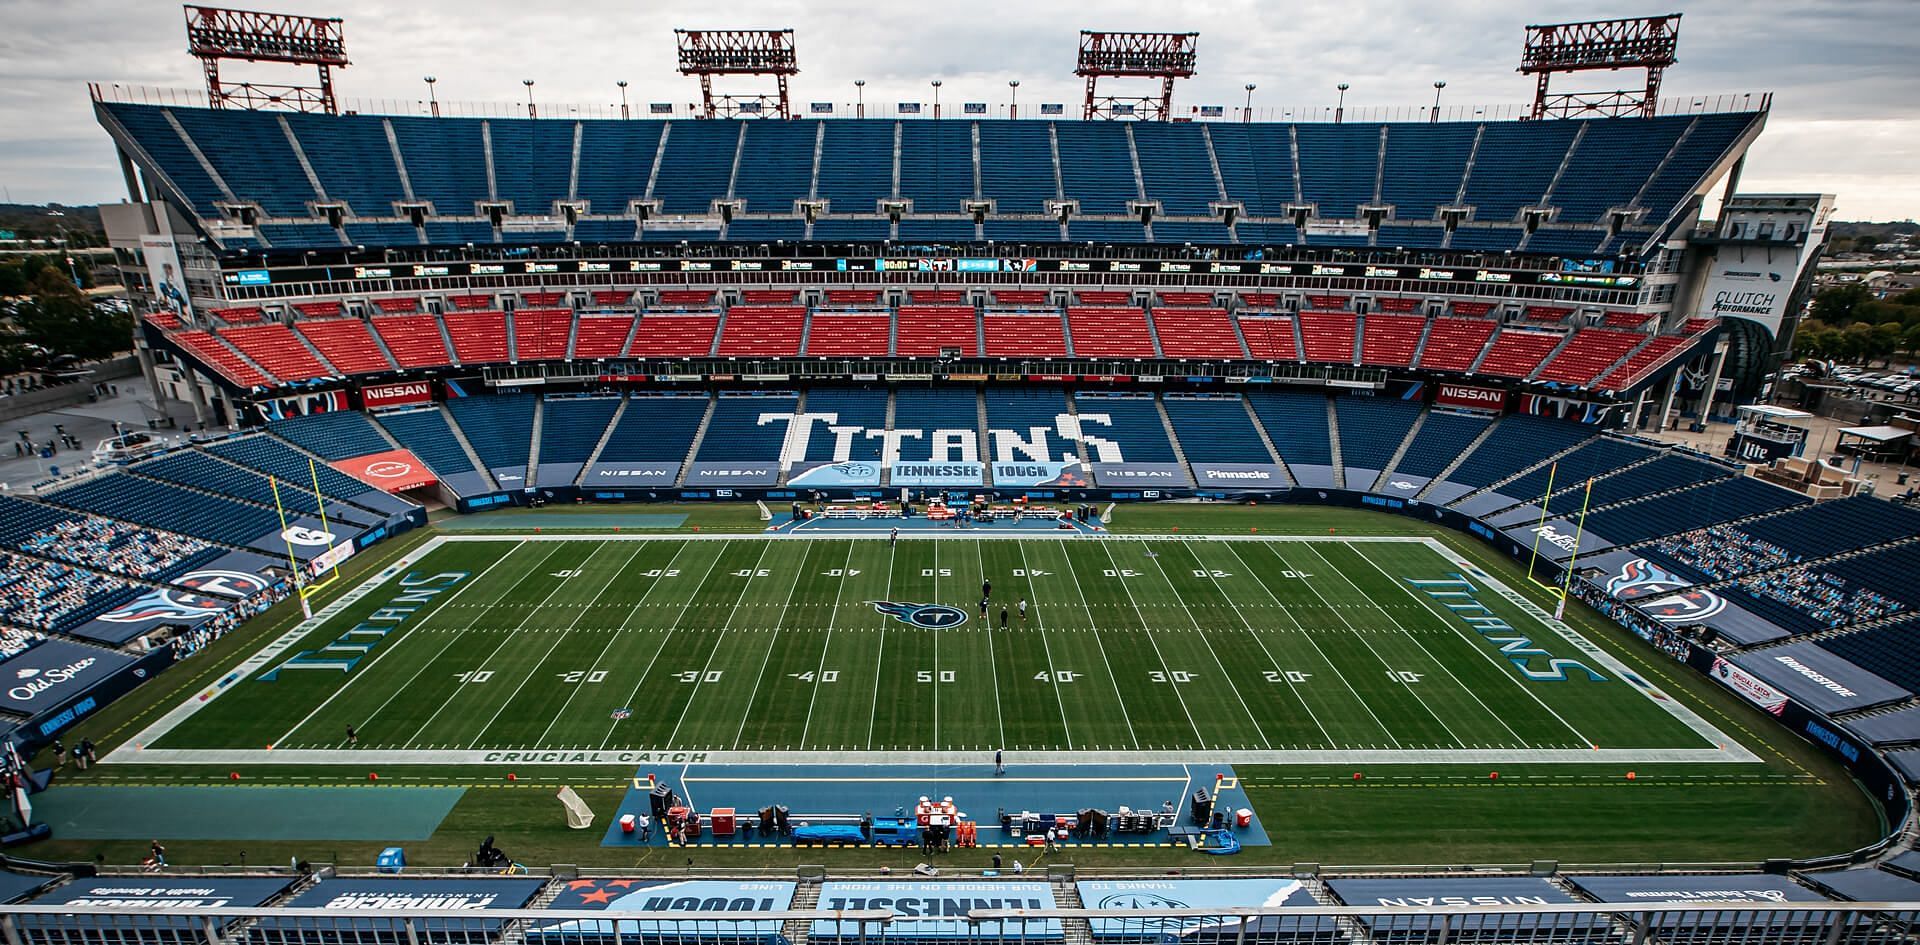 Nissan Stadium, current home of the Tennessee Titans. Source: Nashville Post